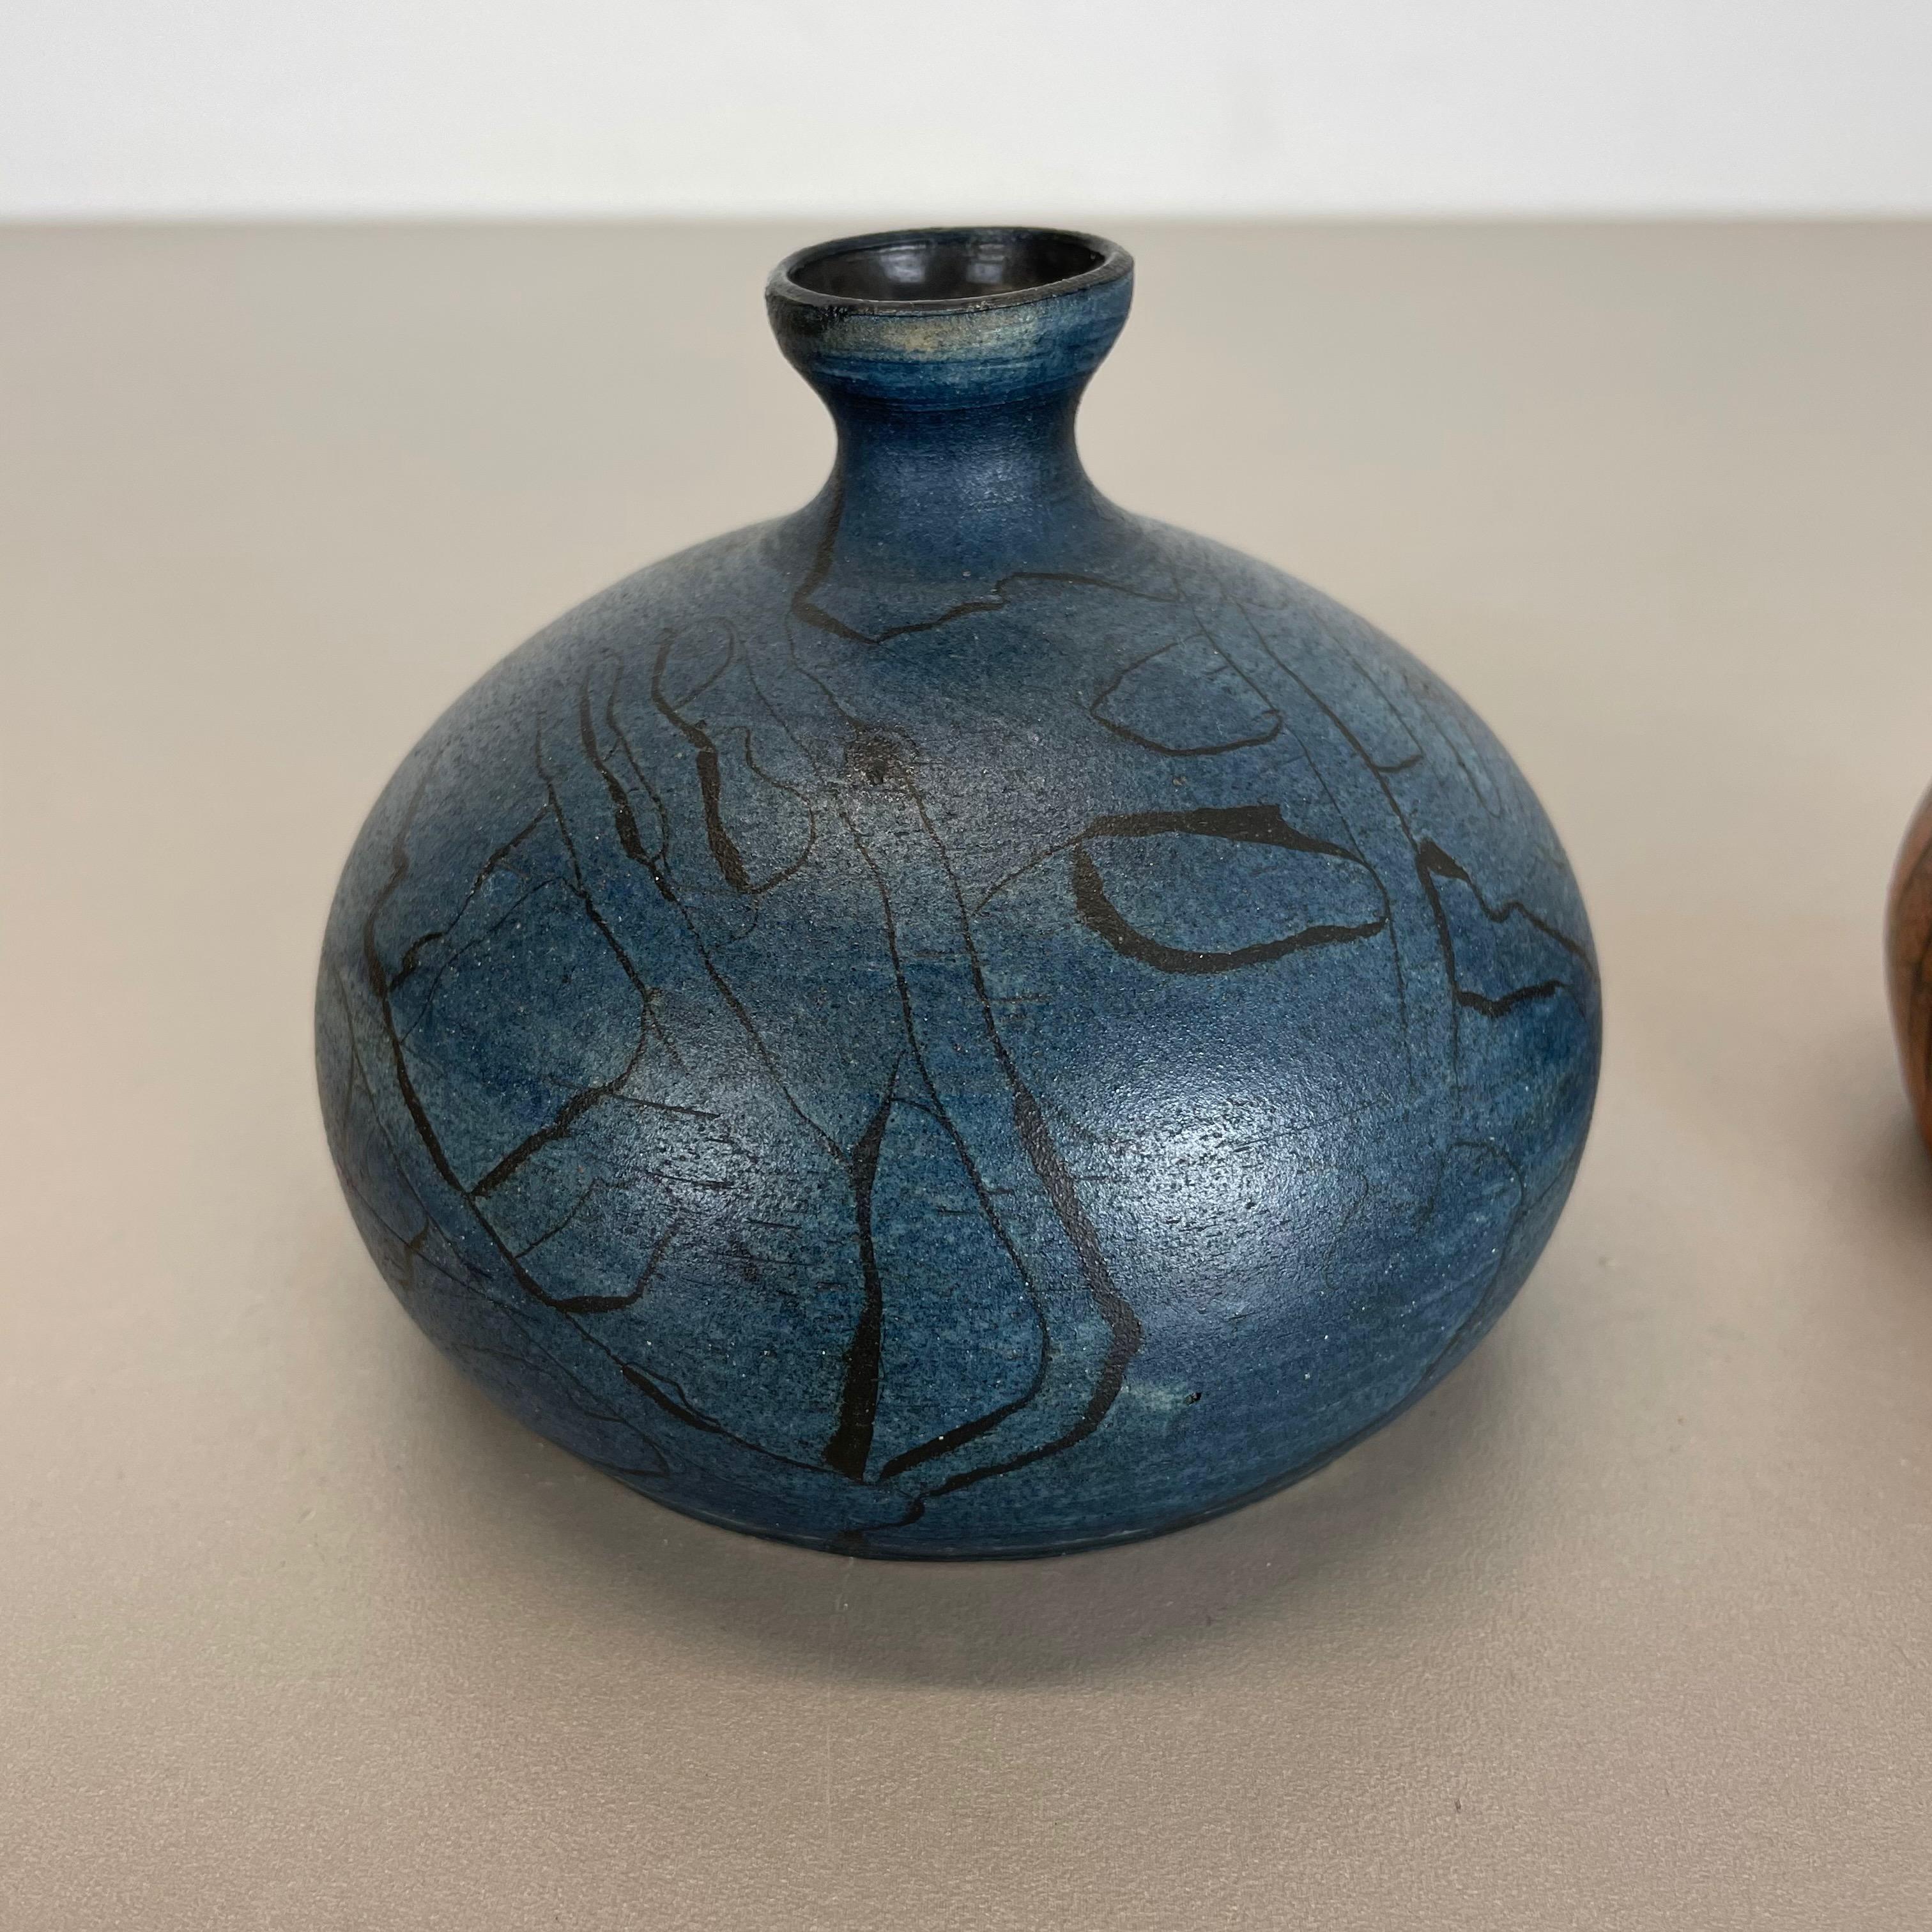 Set of 2 Ceramic Studio Pottery Vase by Gerhard Liebenthron, Germany, 1980s In Good Condition For Sale In Kirchlengern, DE